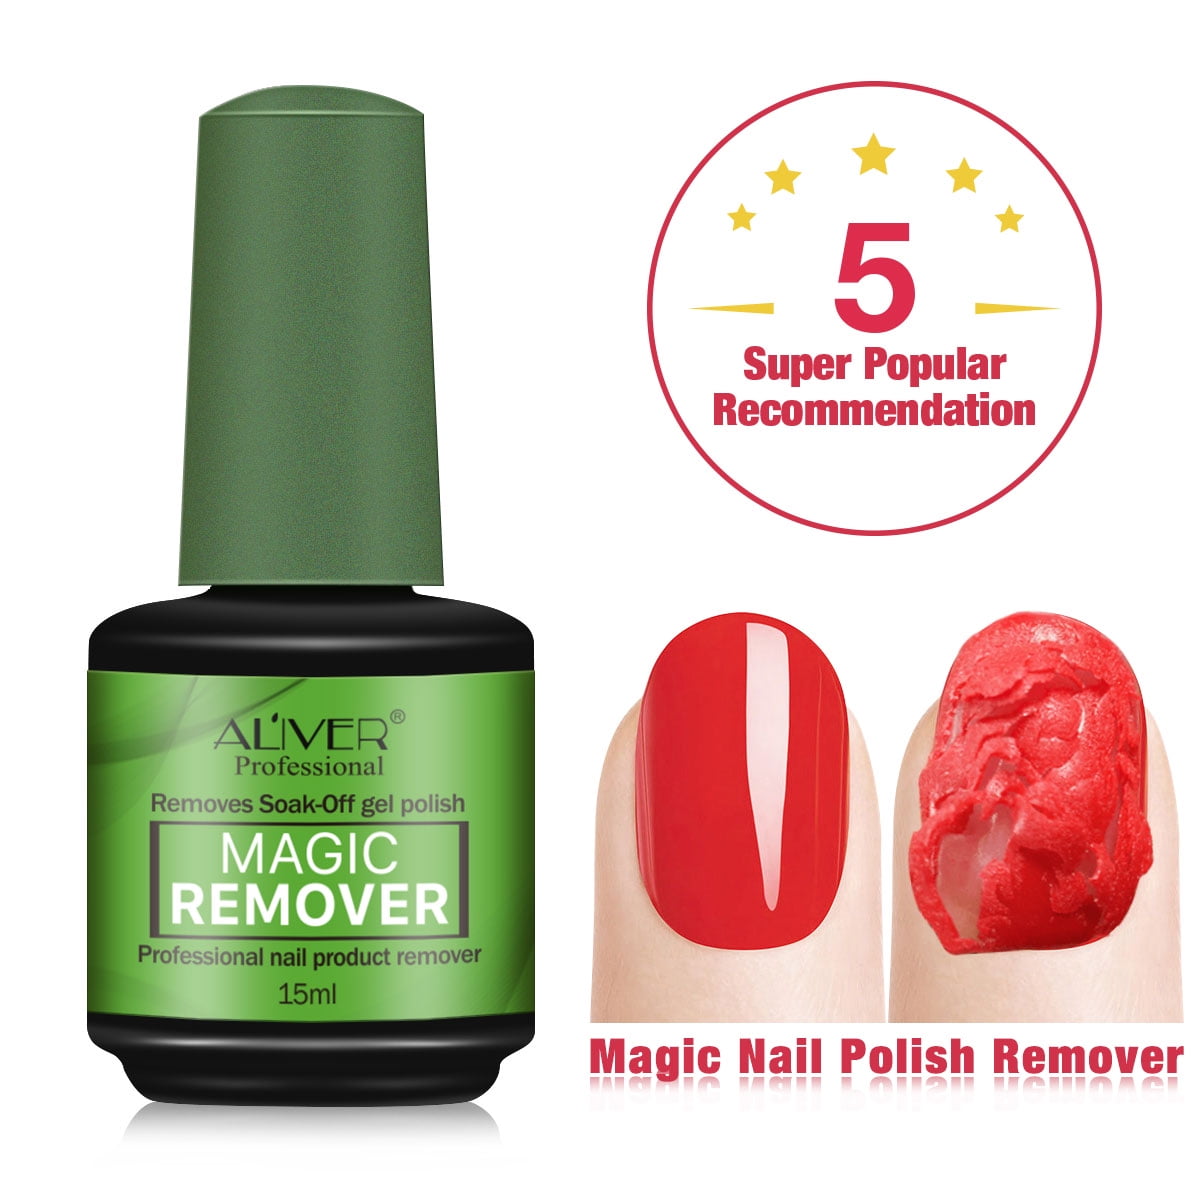 Buy Plum Color Affair Nail Polish Remover - Acetone-Free Online at Best  Price of Rs 93.56 - bigbasket